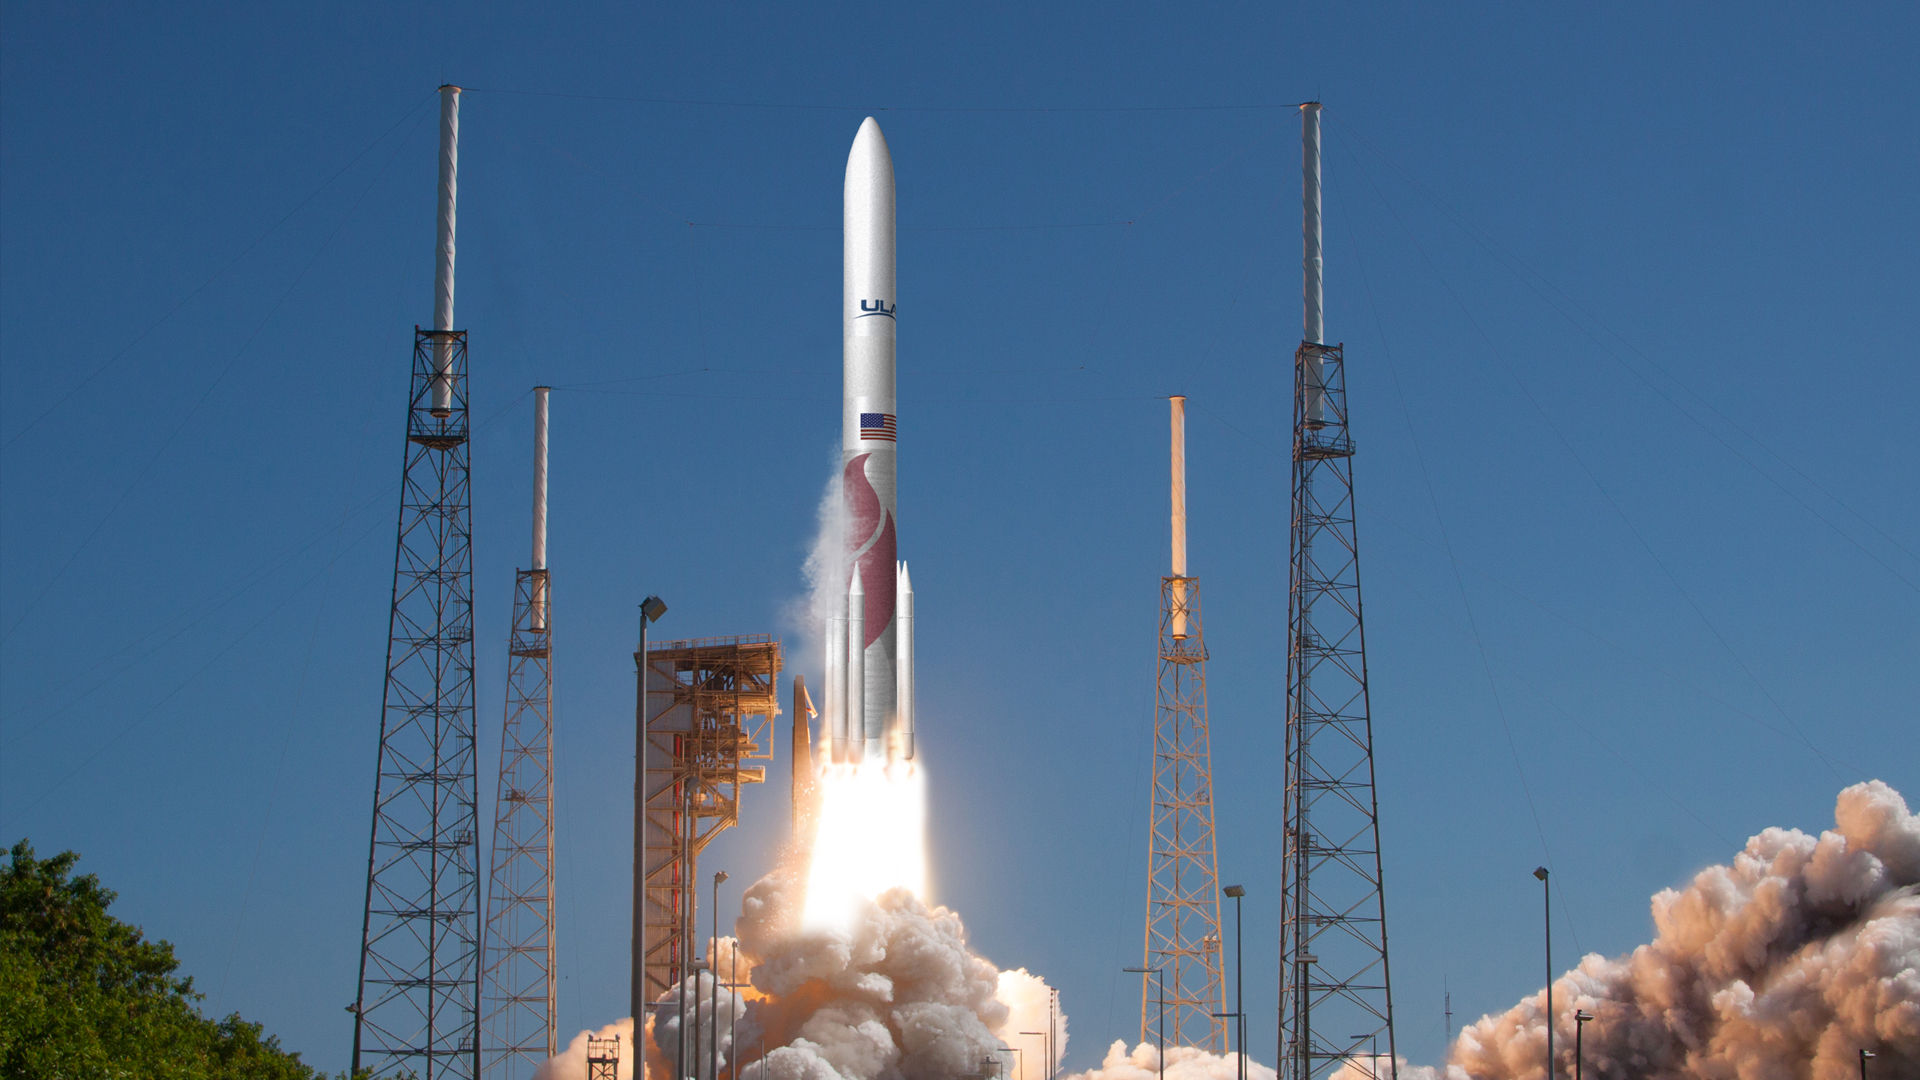 ULA's Vulcan Rocket Set for Power Surge with Enhanced RL-10 Engines